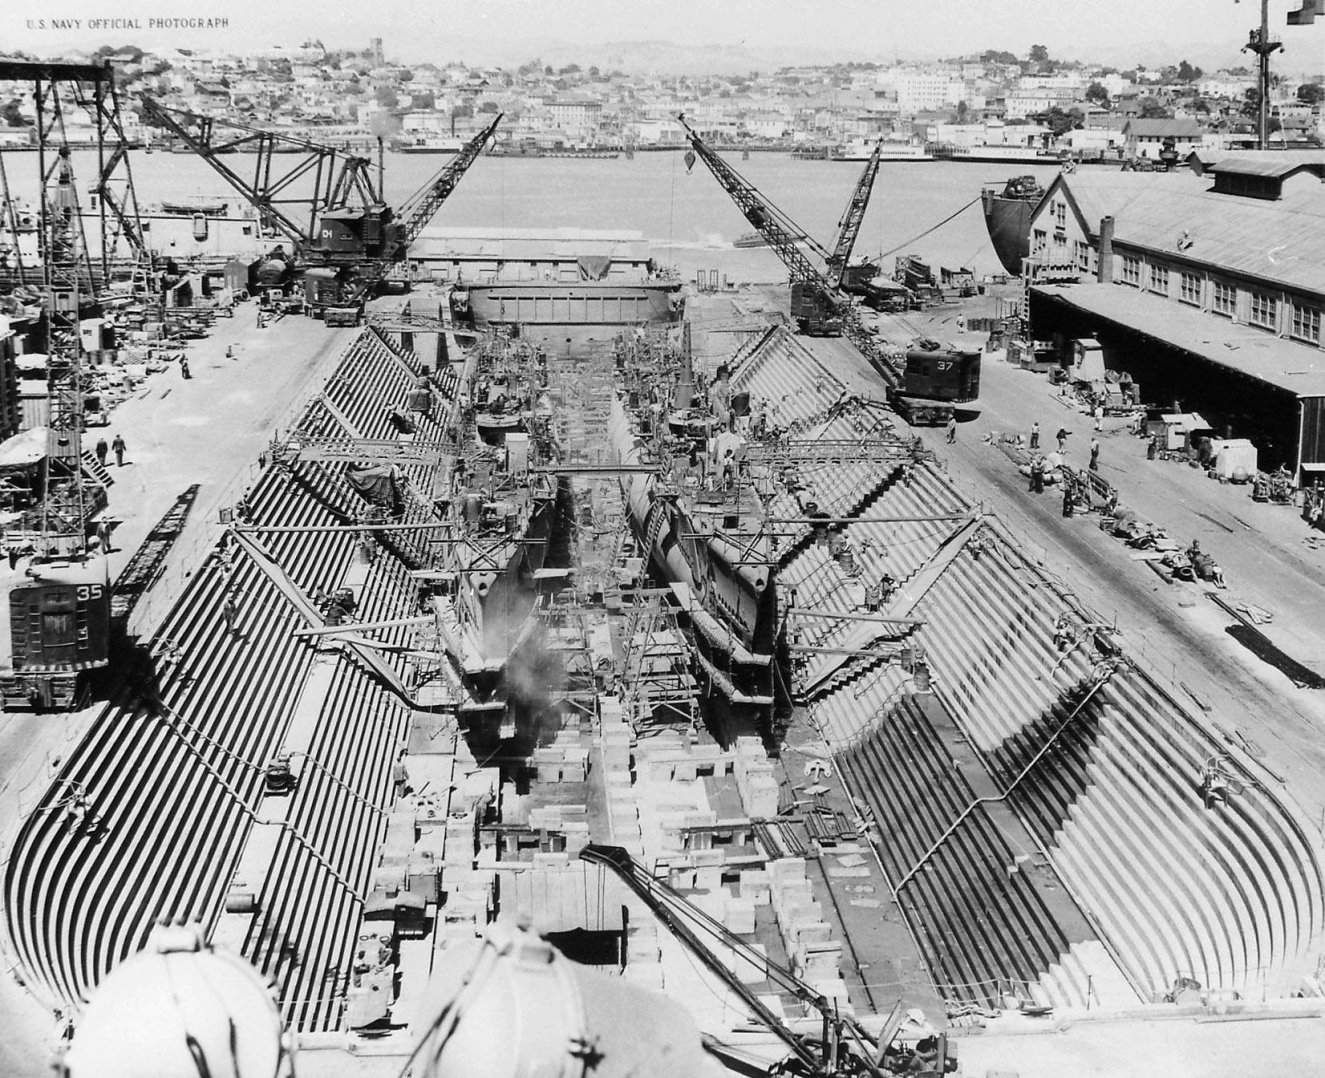 USS Boarfish and USS Blueback in the drydock at Mare Island Navy Yard, Vallejo, California, United States, 12 Jun 1946